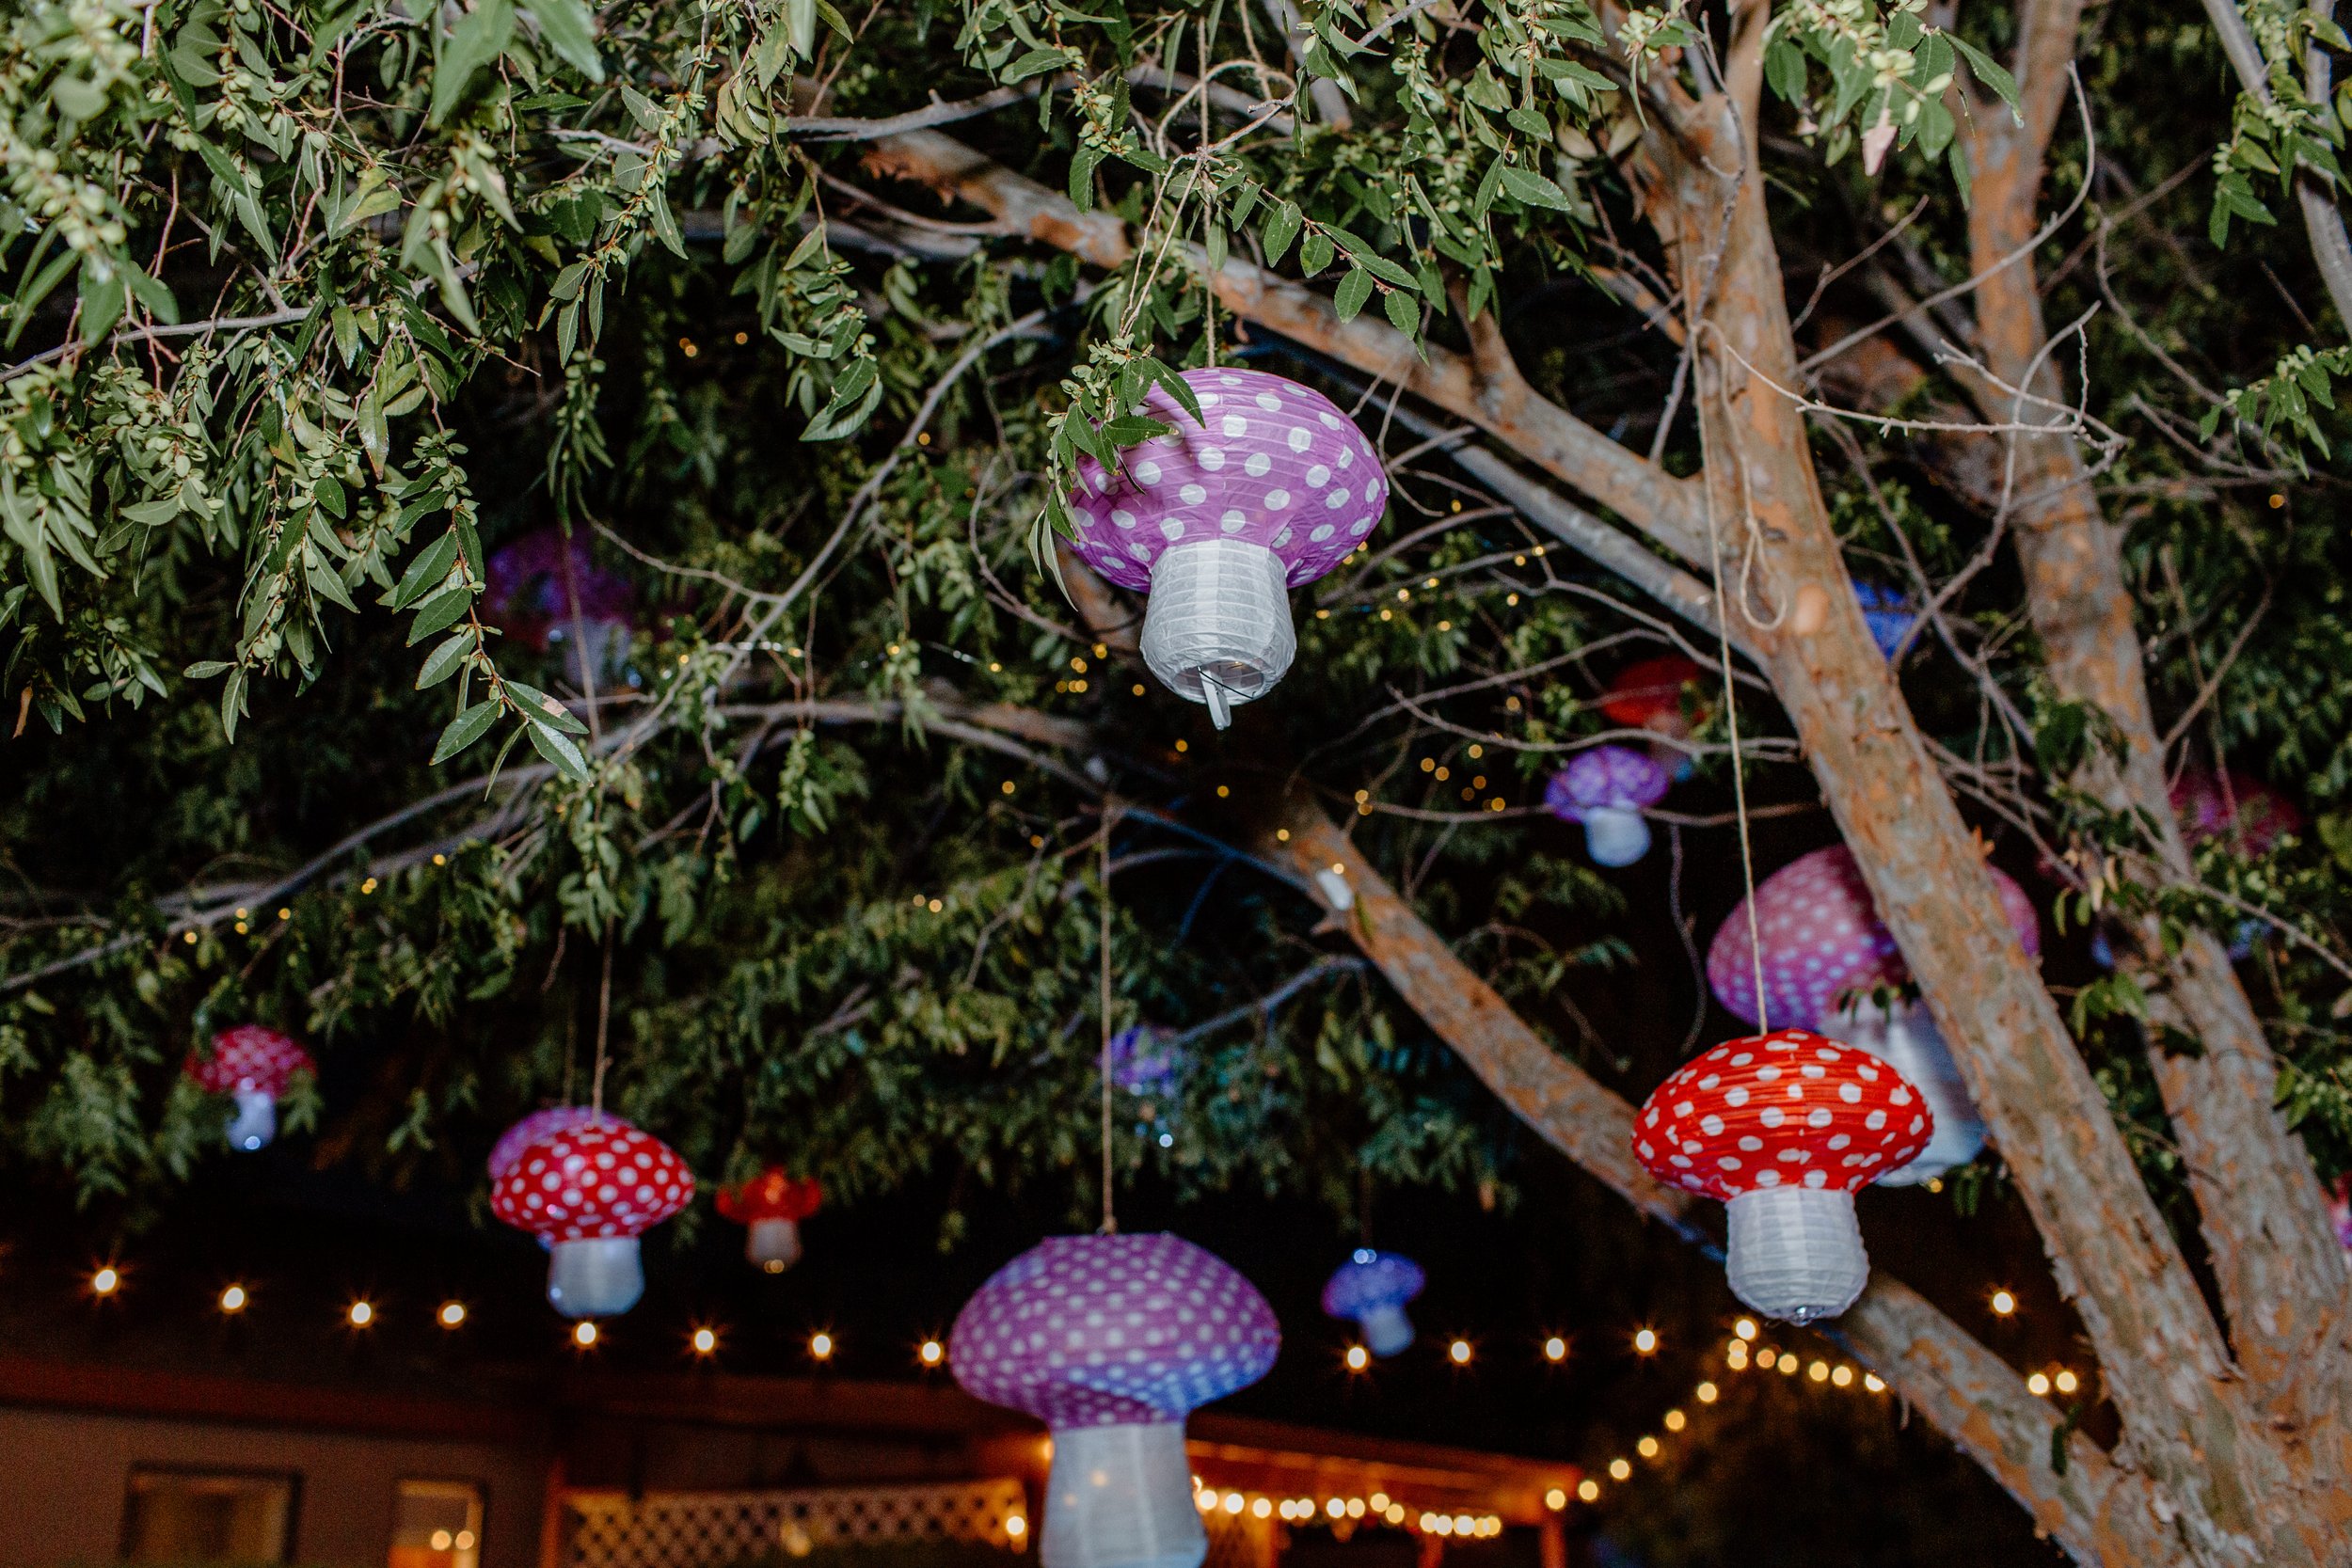  mushroom wedding decor in trees of reception after rock climbing session 